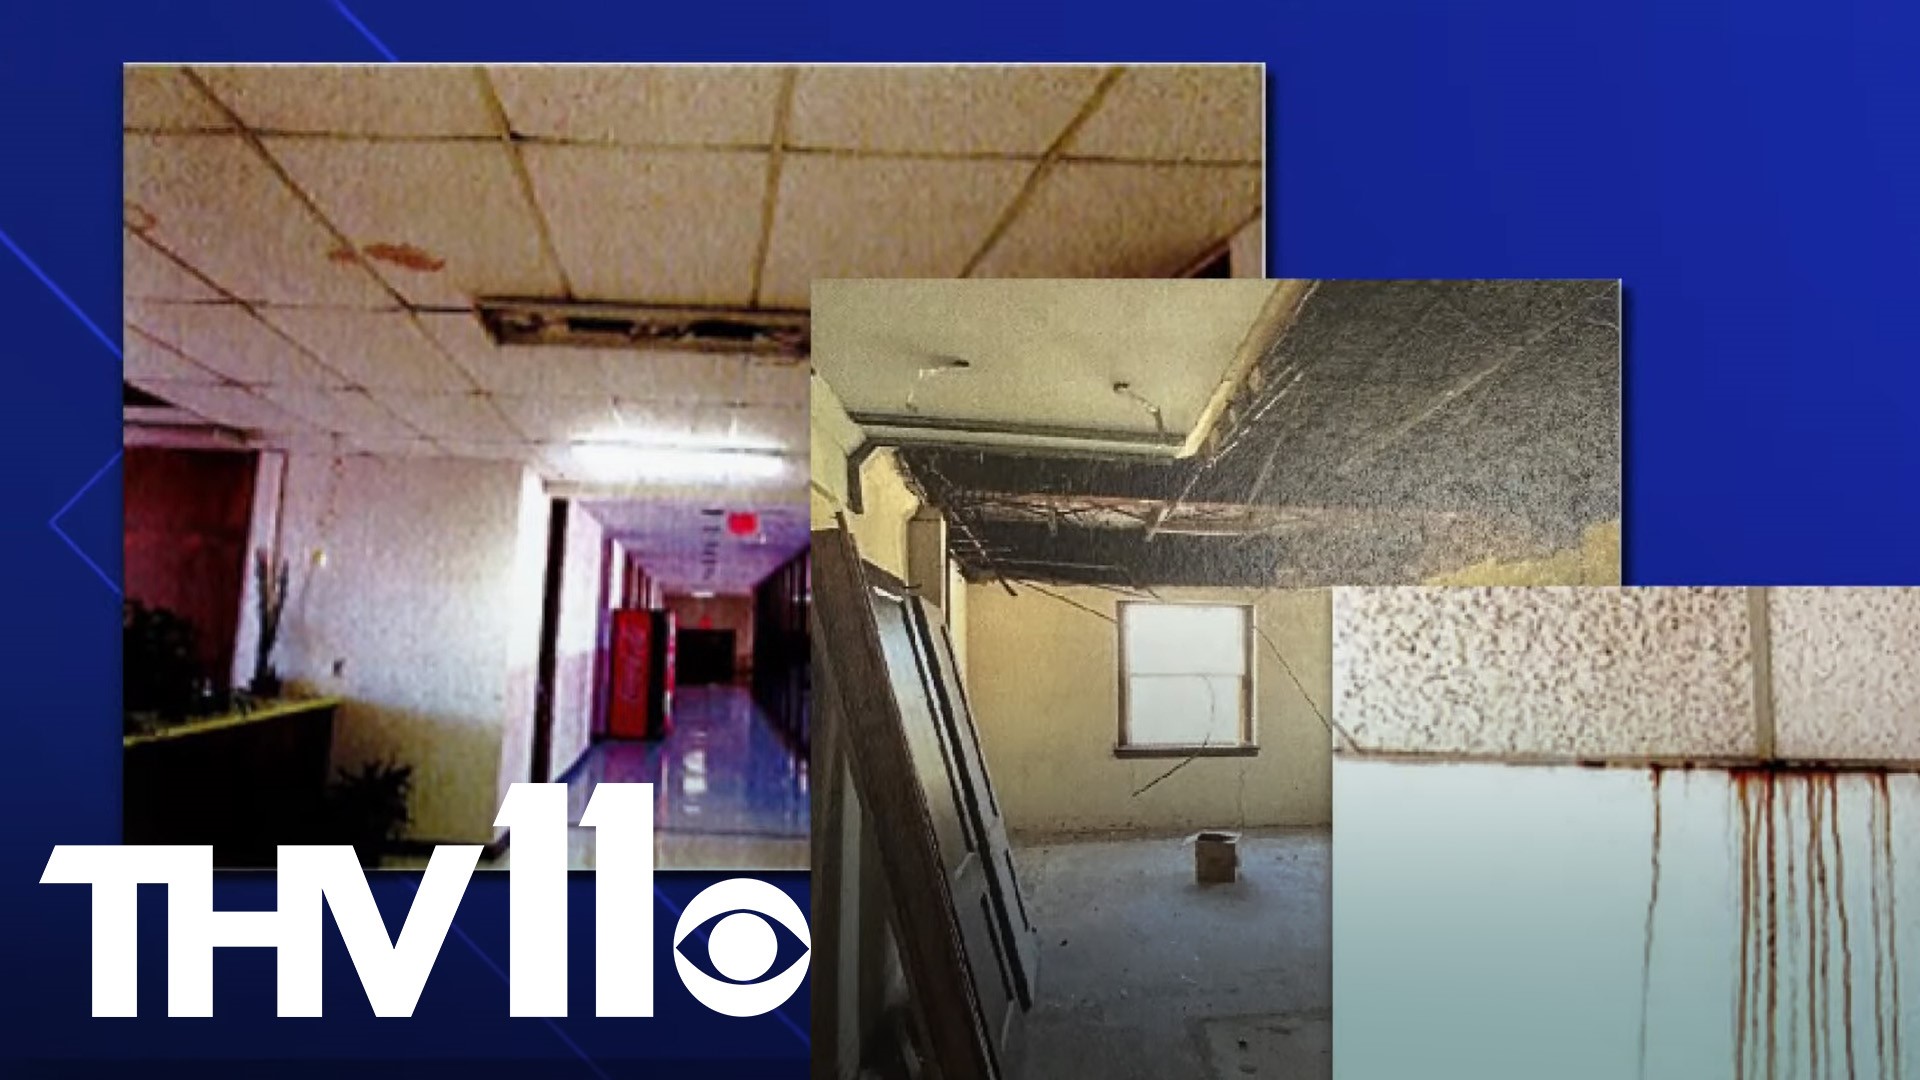 After several images of disrepair surfaced from inside of the Arkansas School for the Deaf and Arkansas School for the Blind, alumni have been calling for changes.